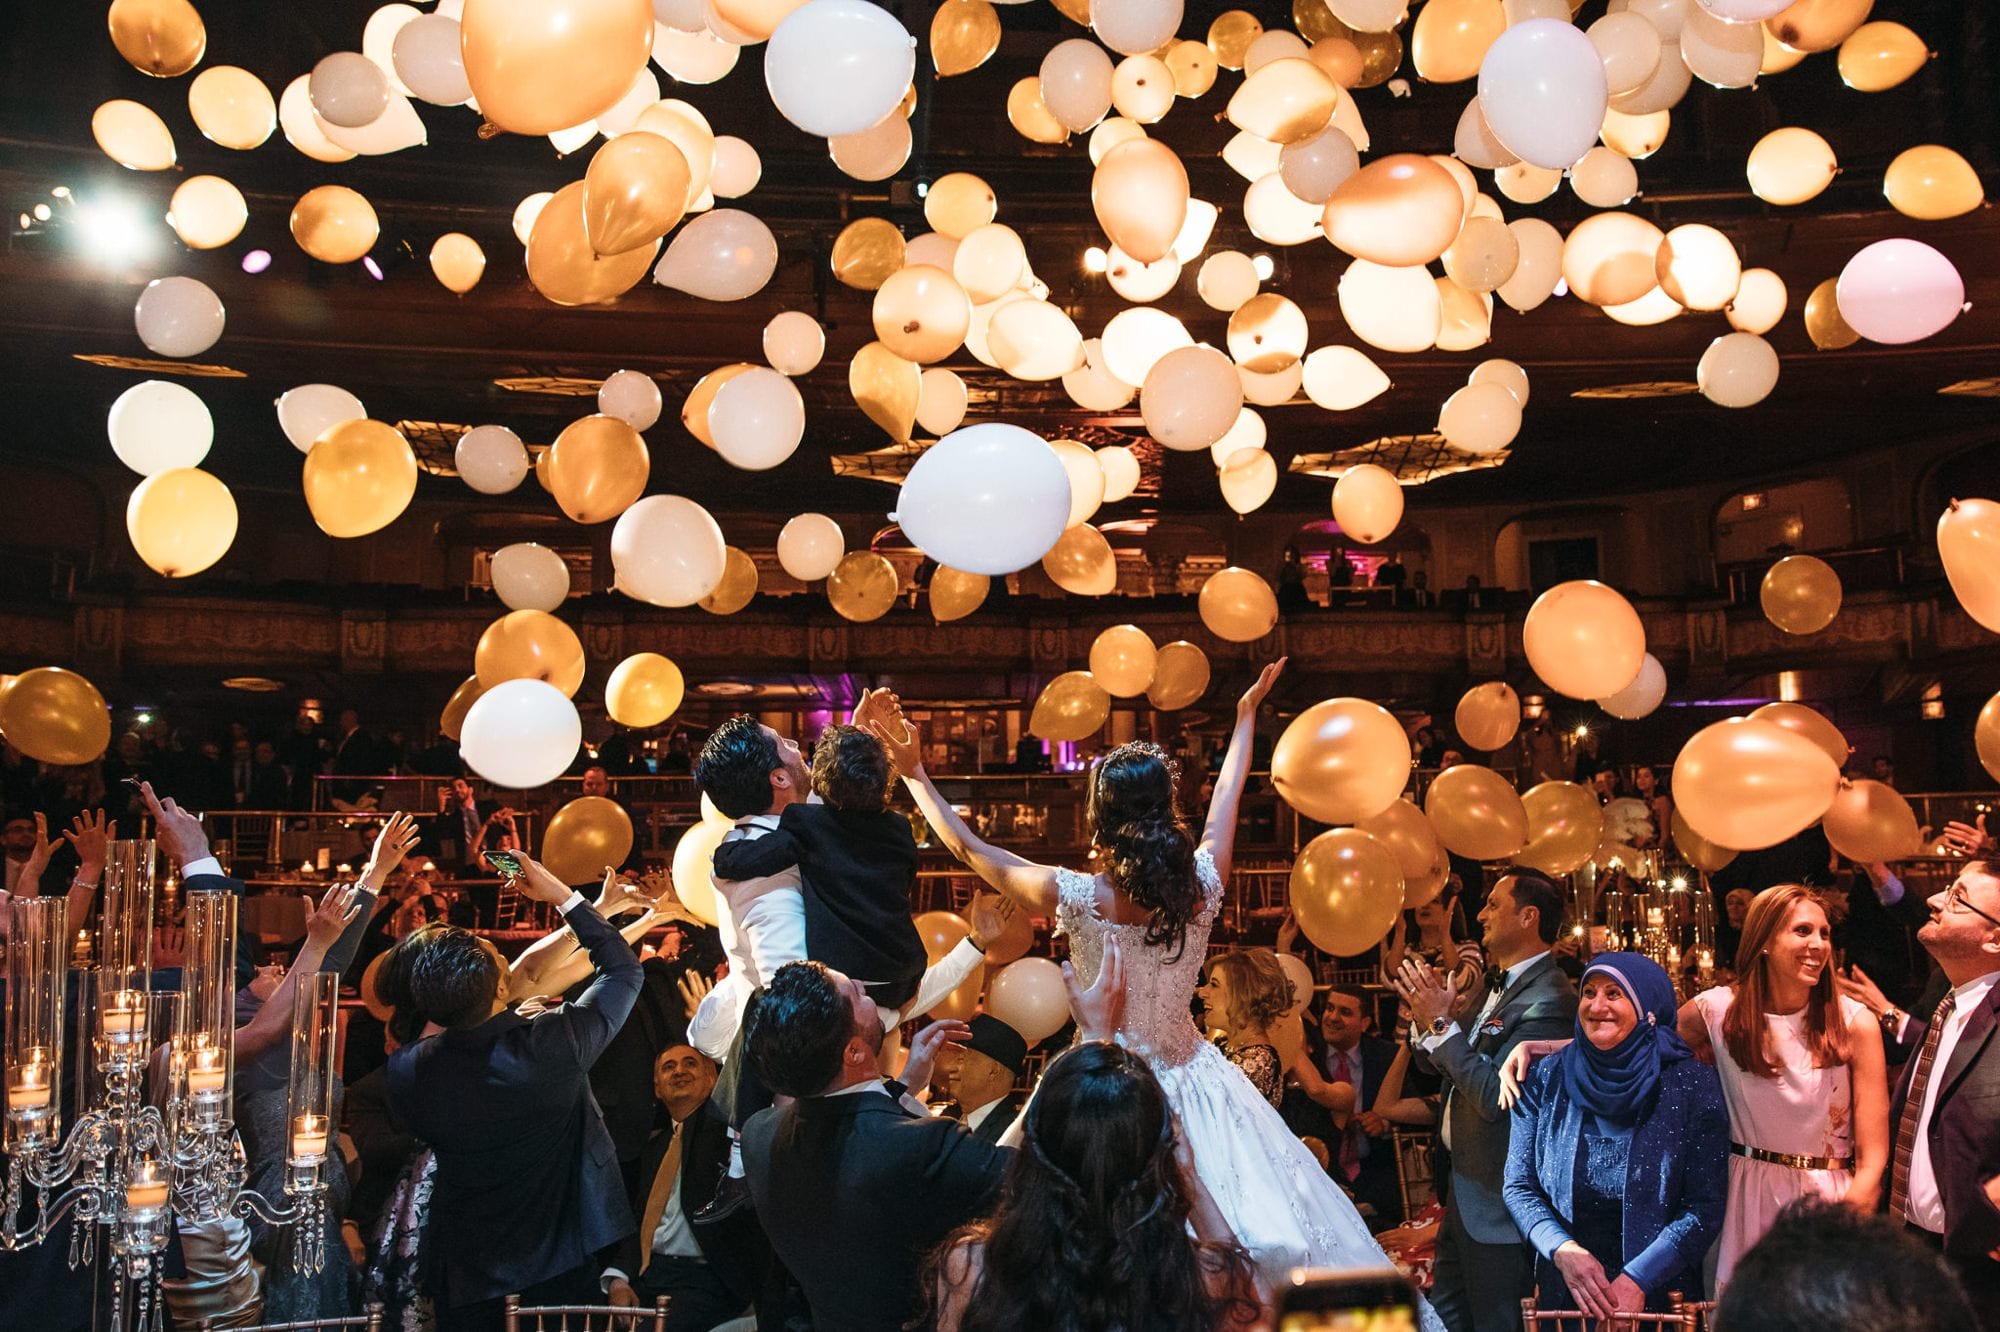 balloons falling from the ceiling during wedding reception